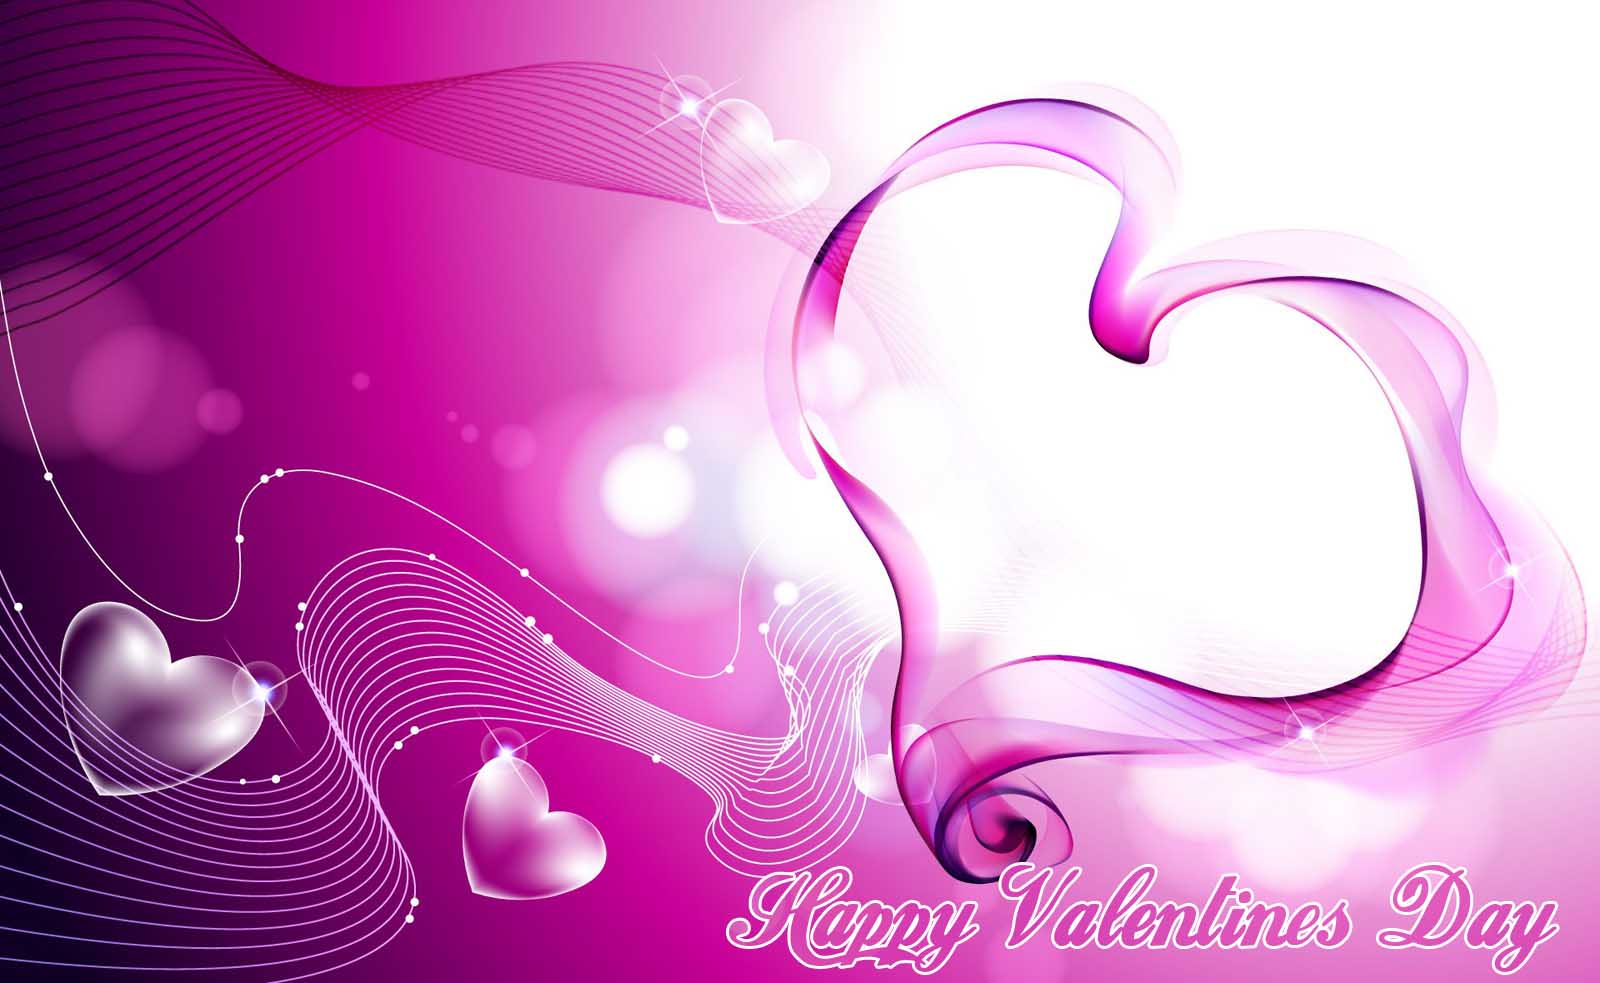 free-download-happy-valentine-day-wallpaper-2015-free-images-and